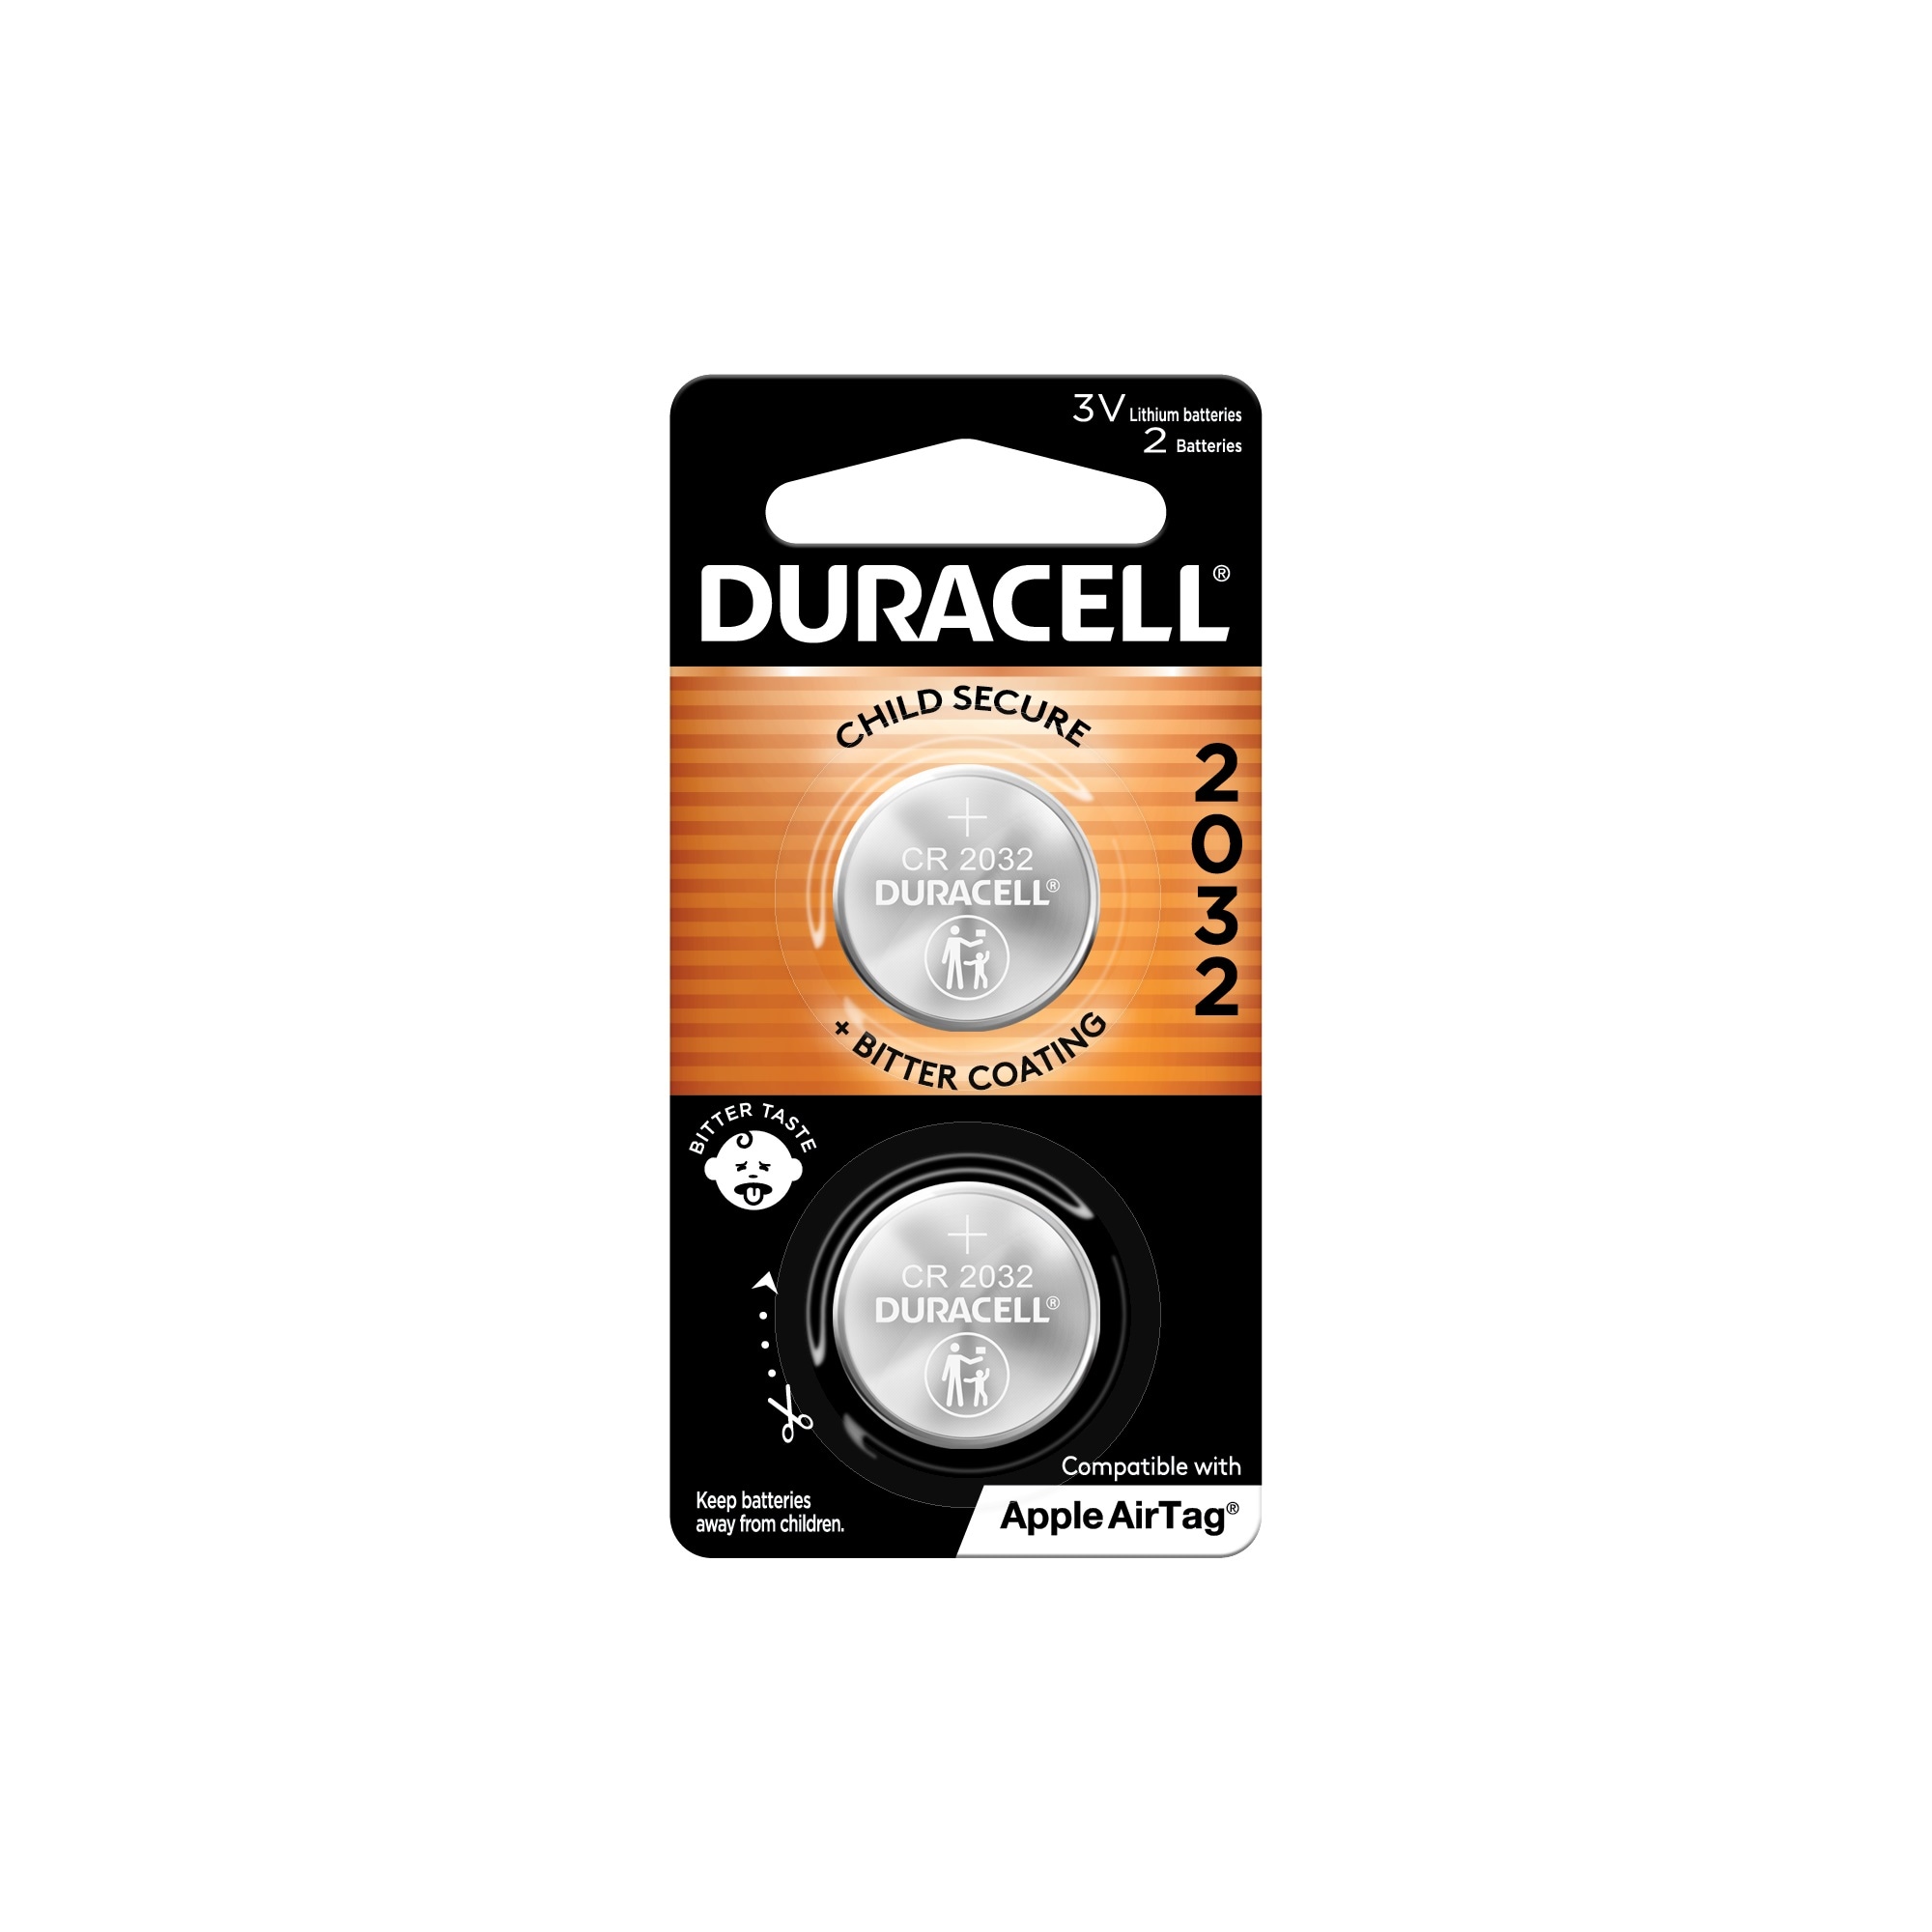 Duracell Lithium Cr2032 Coin Batteries (2-Pack) in the Coin